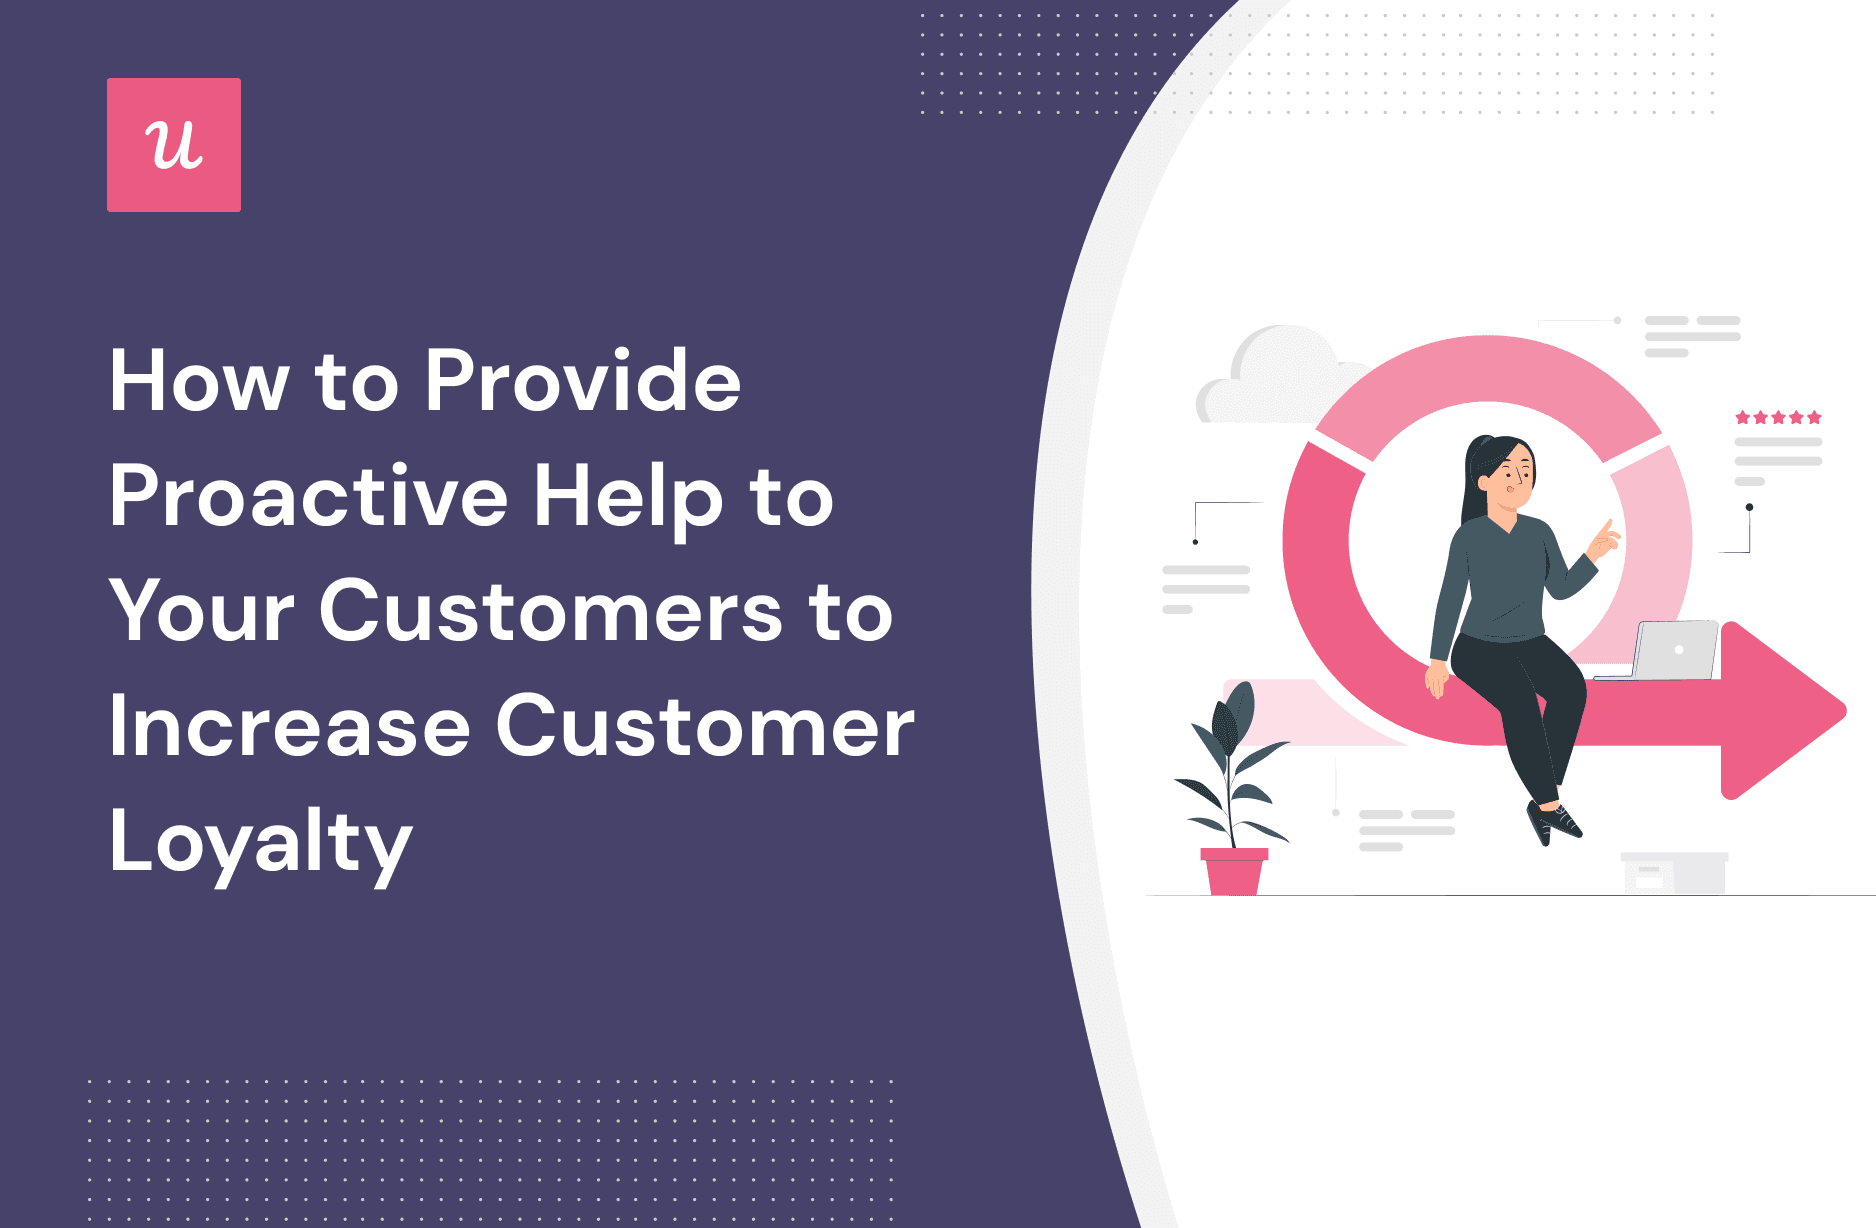 How to Provide Proactive Help to Your Customers to Increase Customer Loyalty cover